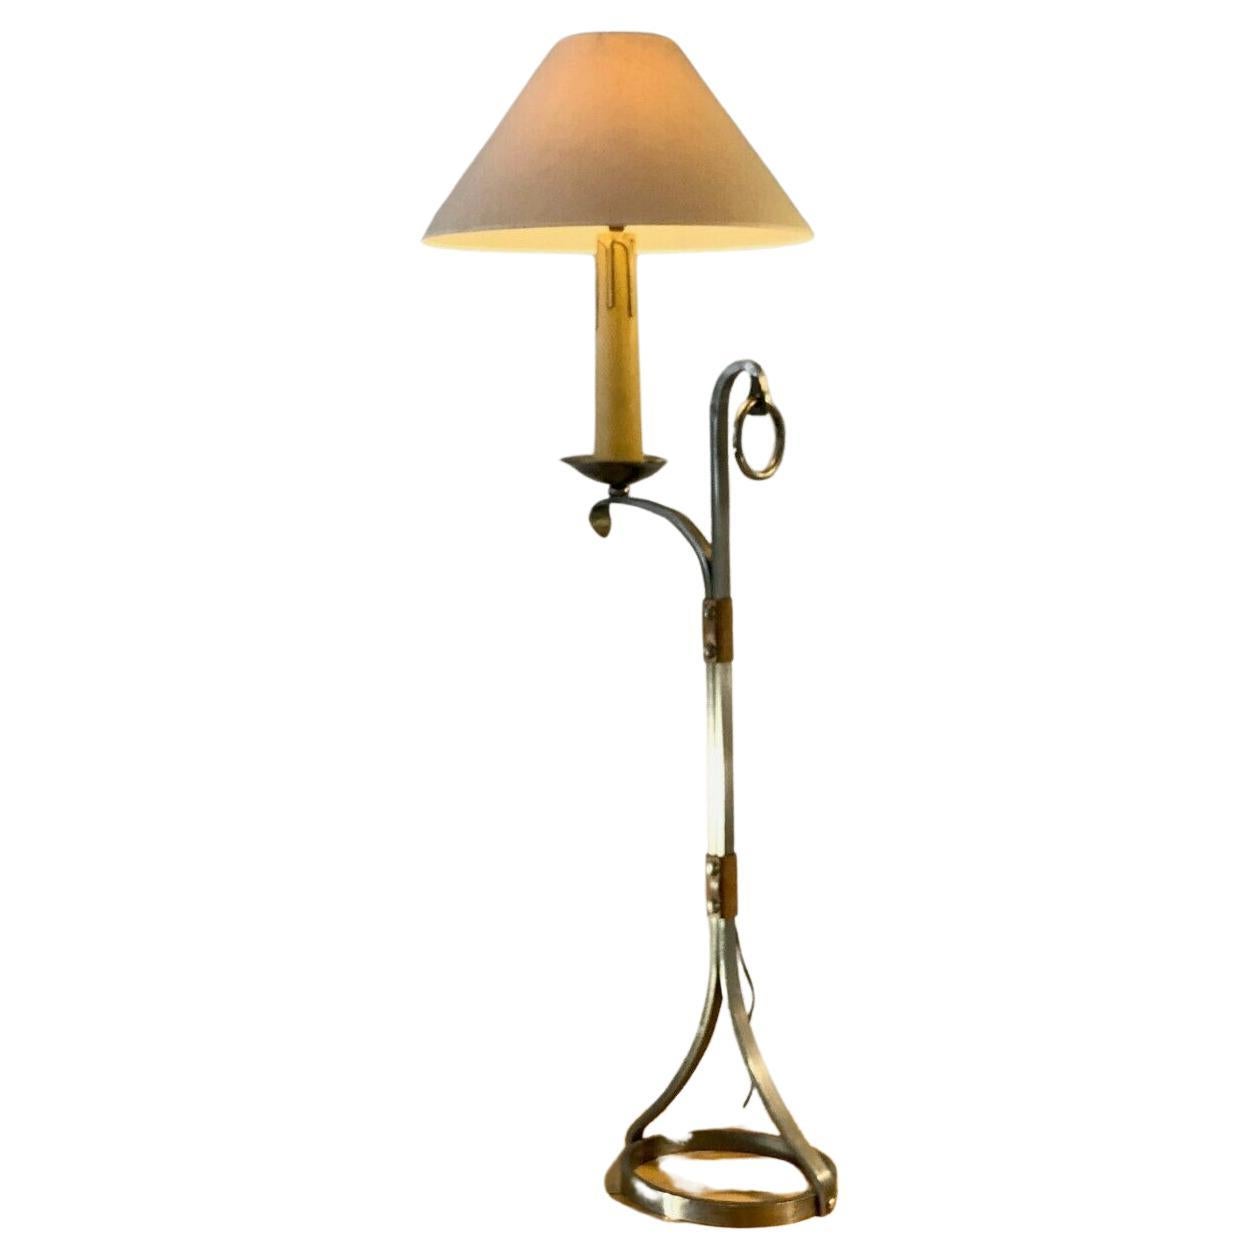 A NEOCLASSICAL BRUTALIST FLOOR LAMP, by JEAN-PIERRE RYCKAERT, France 1960 For Sale